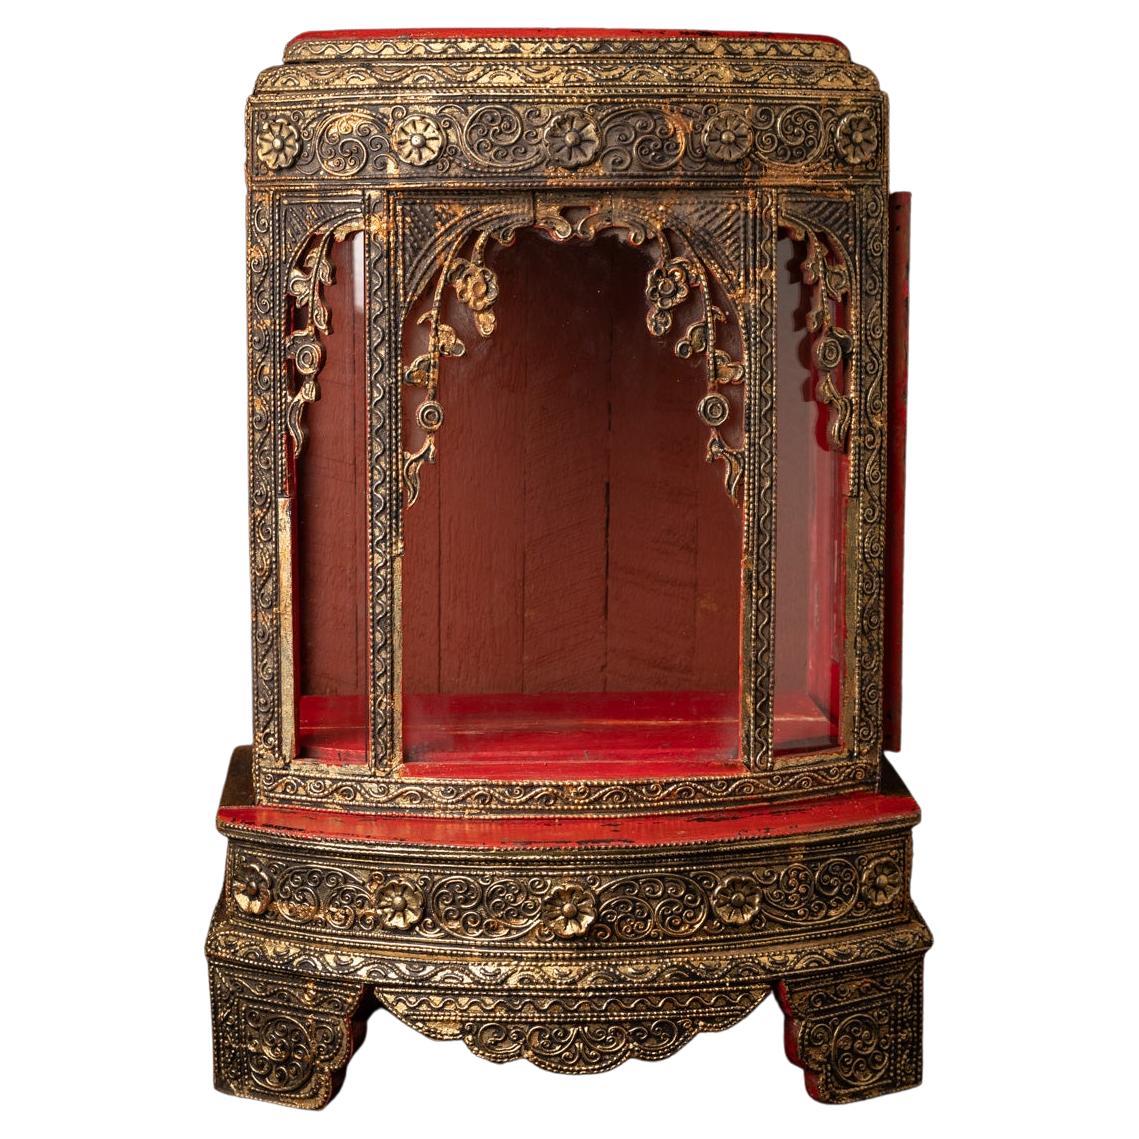 19th century antique wooden Burmese Buddha temple in Mandalay style For Sale